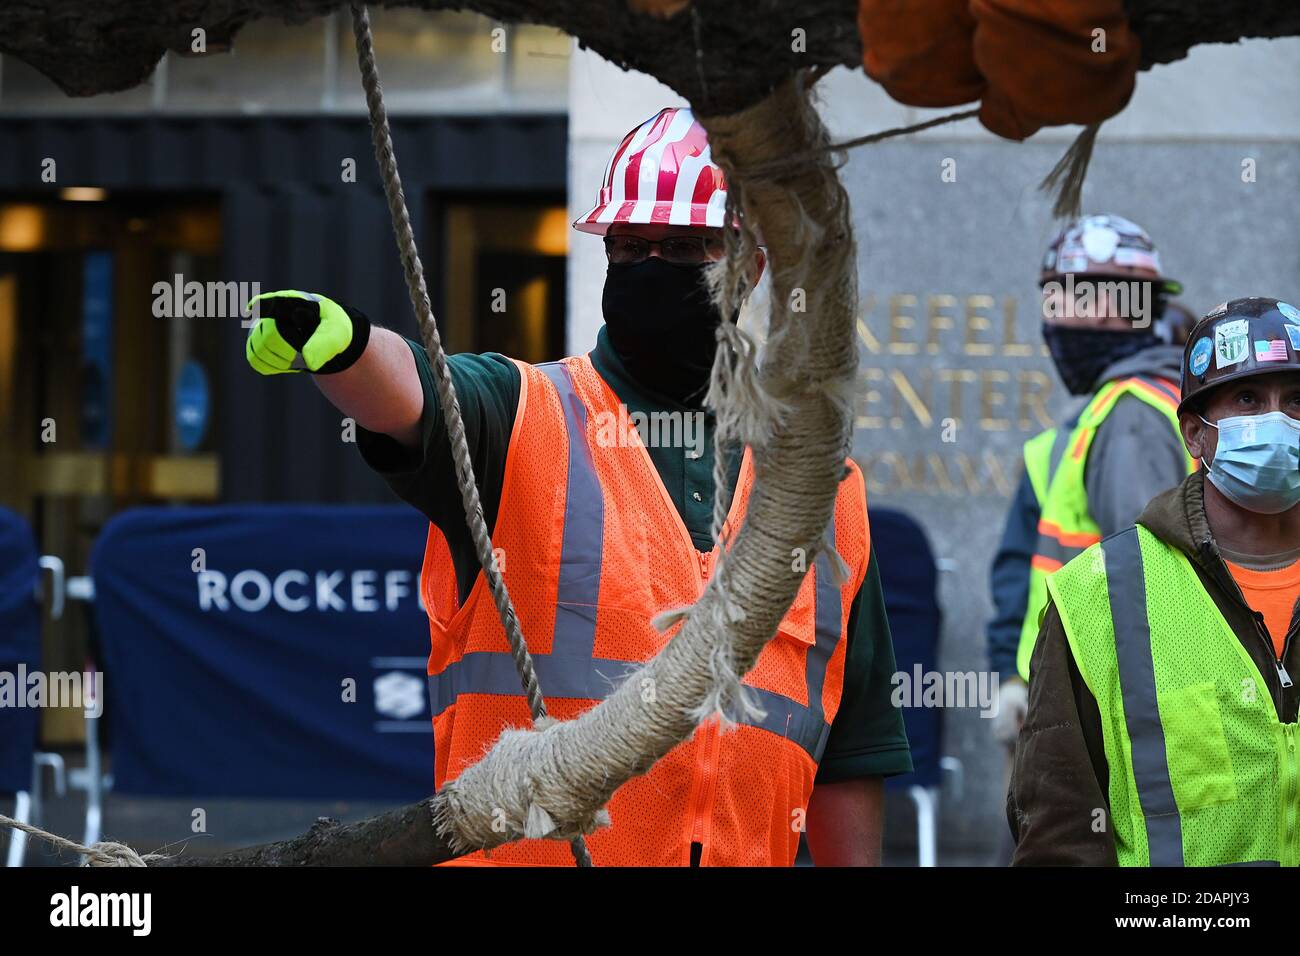 New York City, USA. 14th Nov, 2020. Erik Pauze, head garden at Rockefeller Center, leads riggers in the placement of cable as they prepare to place the 2020 Rockefeller Center Christmas tree onto its platform at Rockefeller Center in New York, NY, November 14, 2020. The 75-foot tall tree is a Norway Spruce that was acquired in Oneonta, N.Y. (Anthony Behar/Sipa USA) Credit: Sipa USA/Alamy Live News Stock Photo